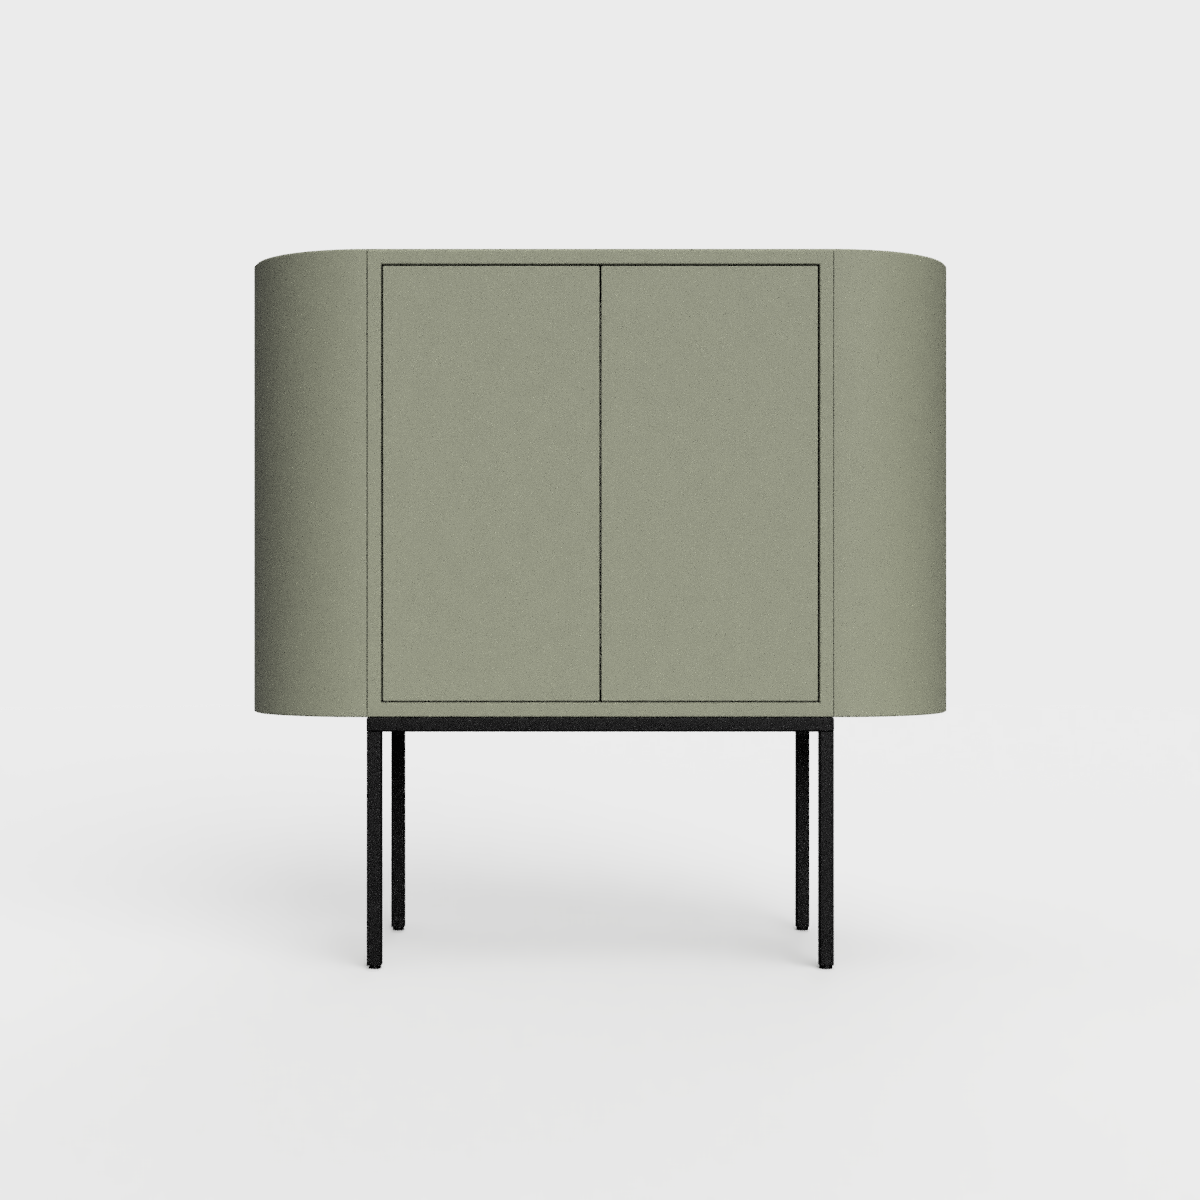 Siena 01 Sideboard in faded olive color, powder-coated steel, elegant and modern piece of furniture for your living room